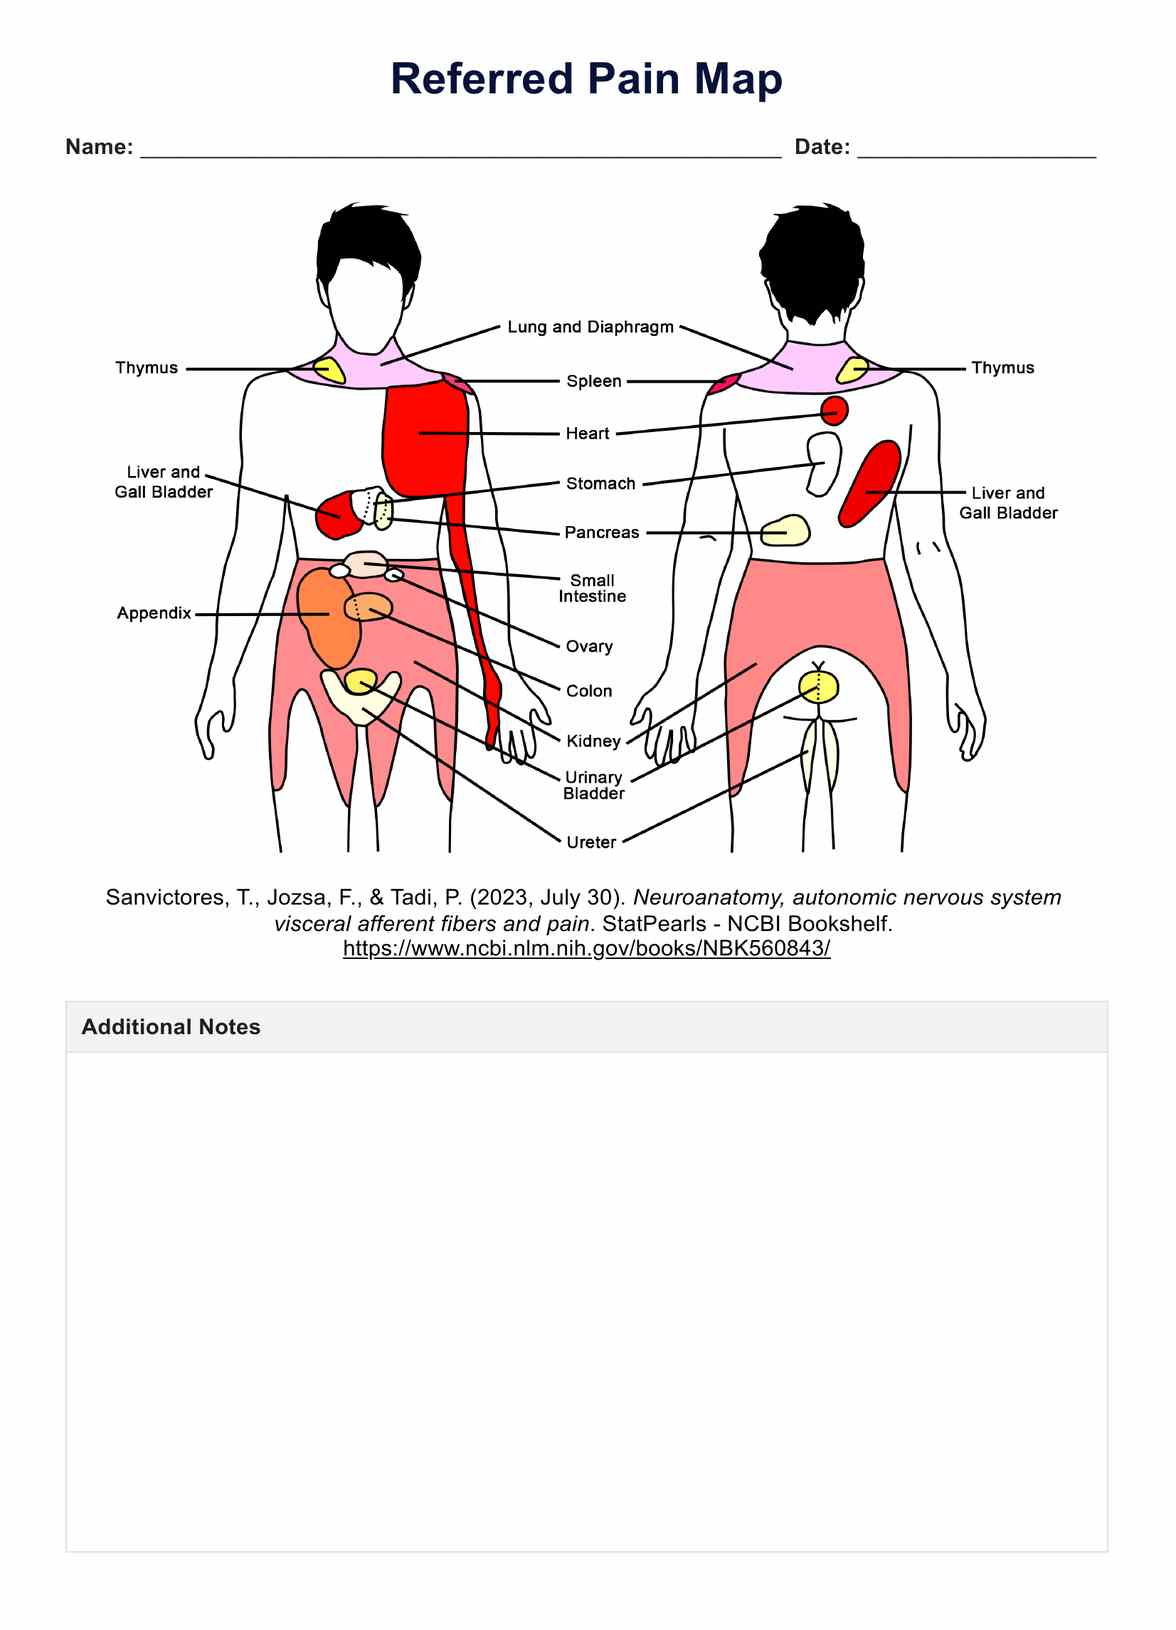 Referred Pain Maps PDF Example